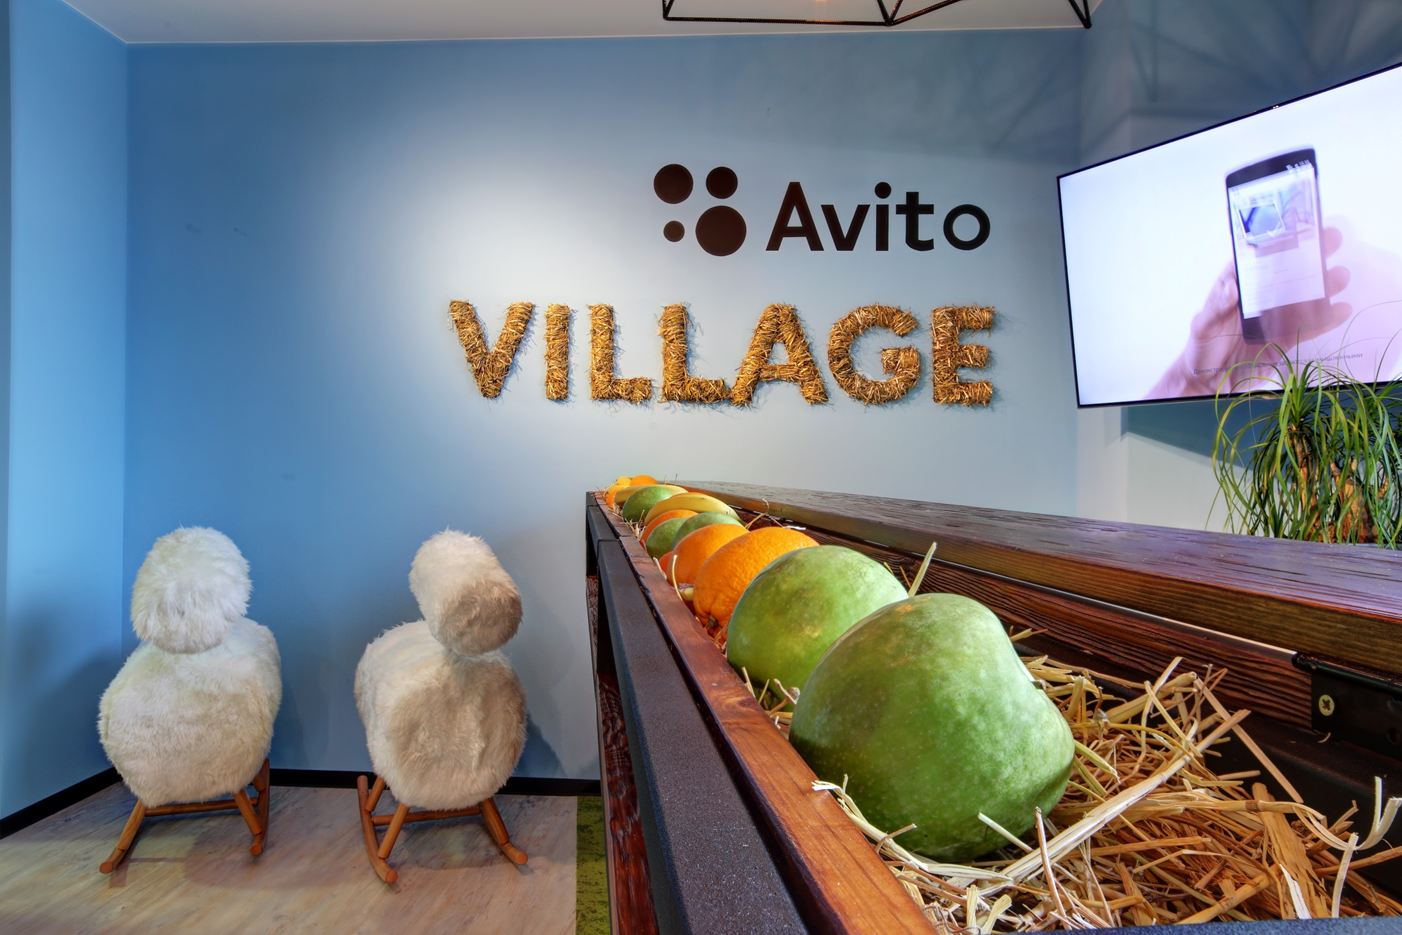 Avito.ru Office in Moscow, Russia by Meandre